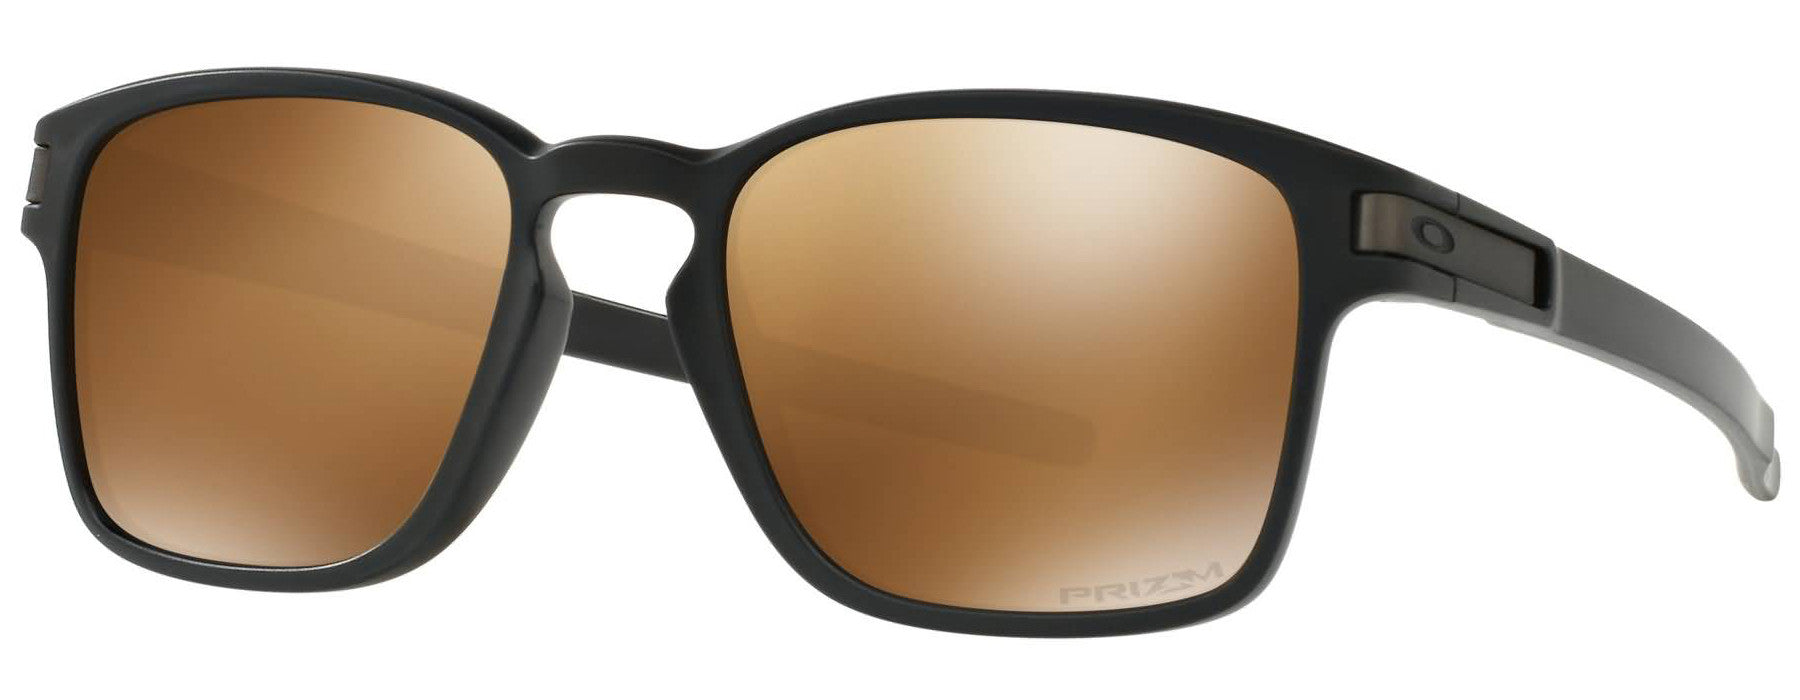 Oakley Introduces The Latch Sunglasses